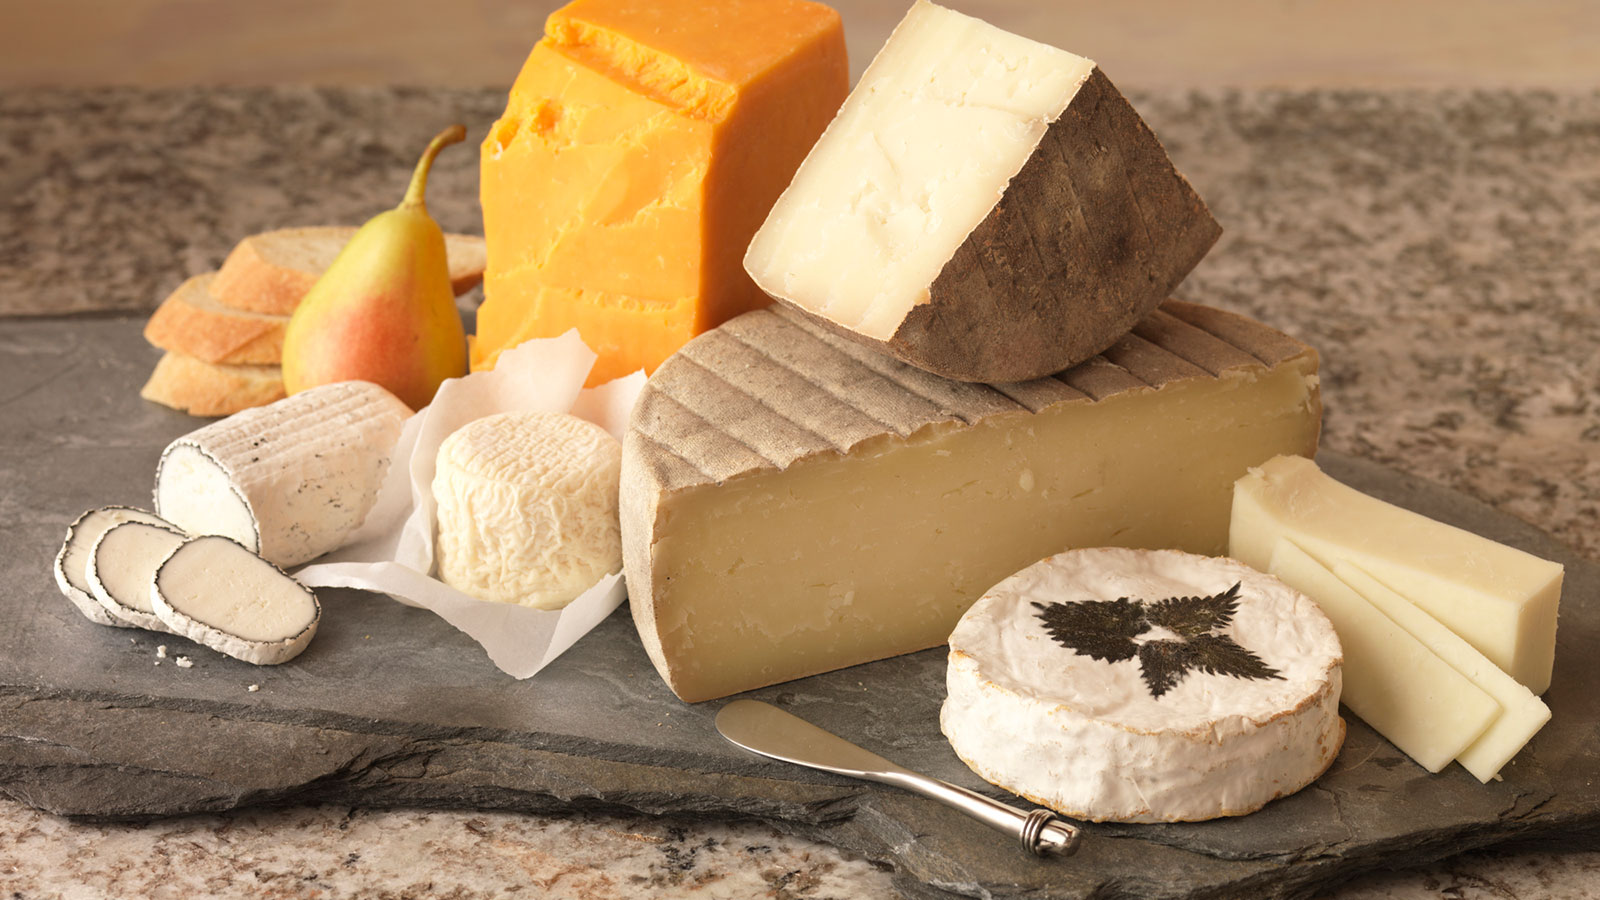 What are the Different Types of Cheese Found?